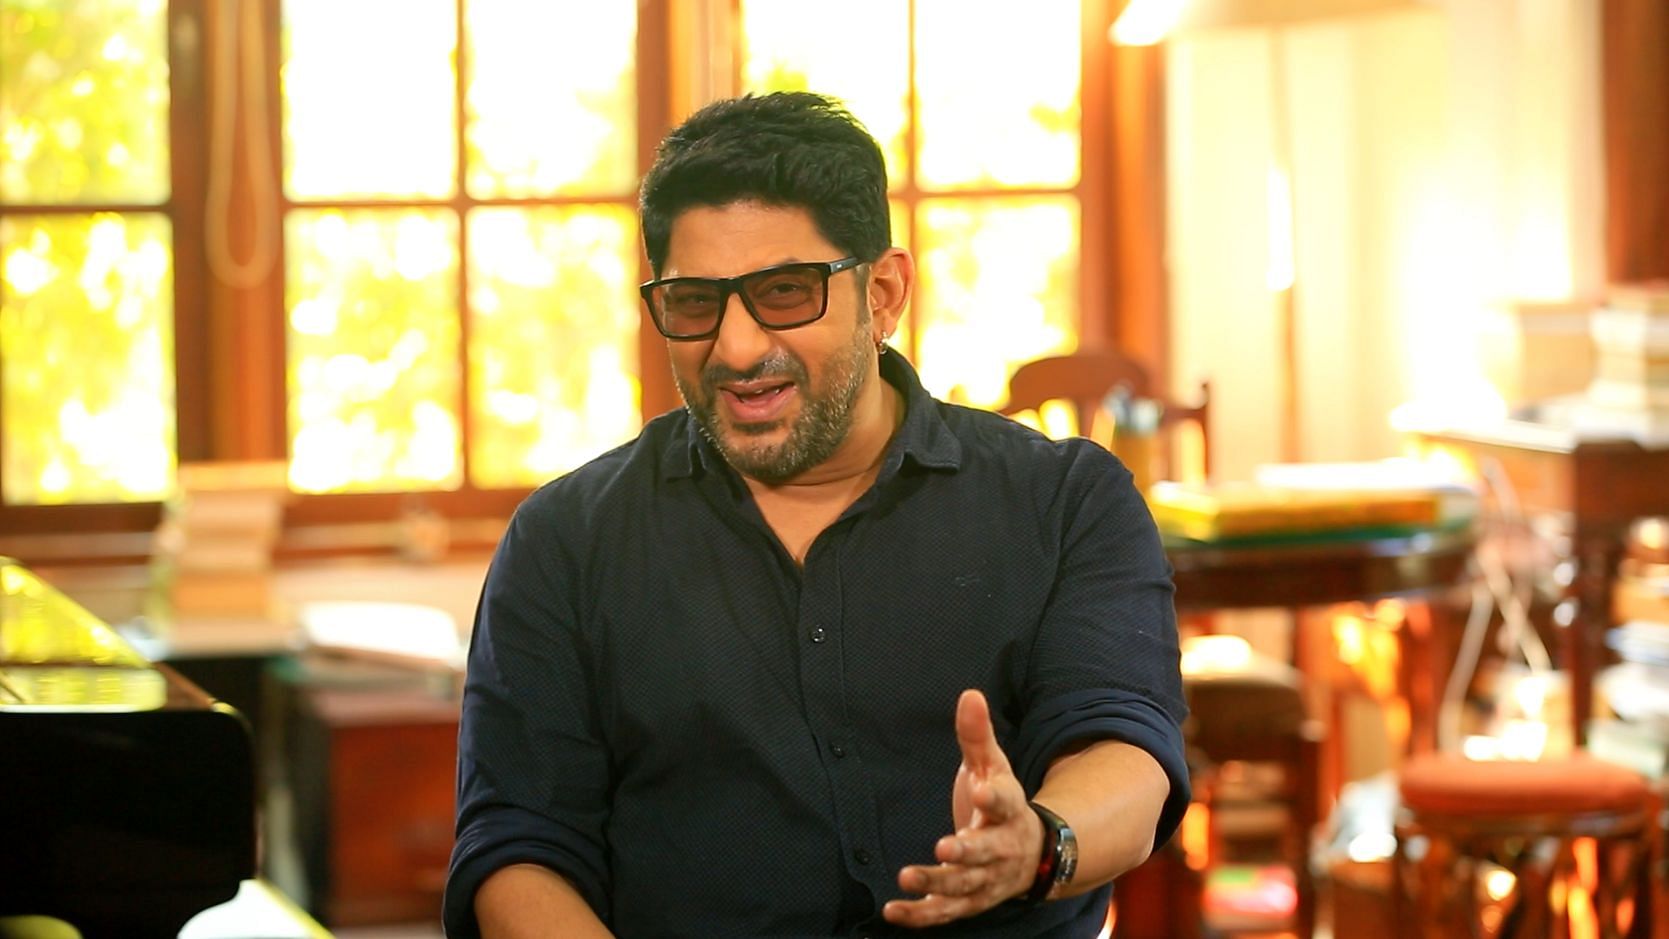 Arshad Warsi answers questions about himself.